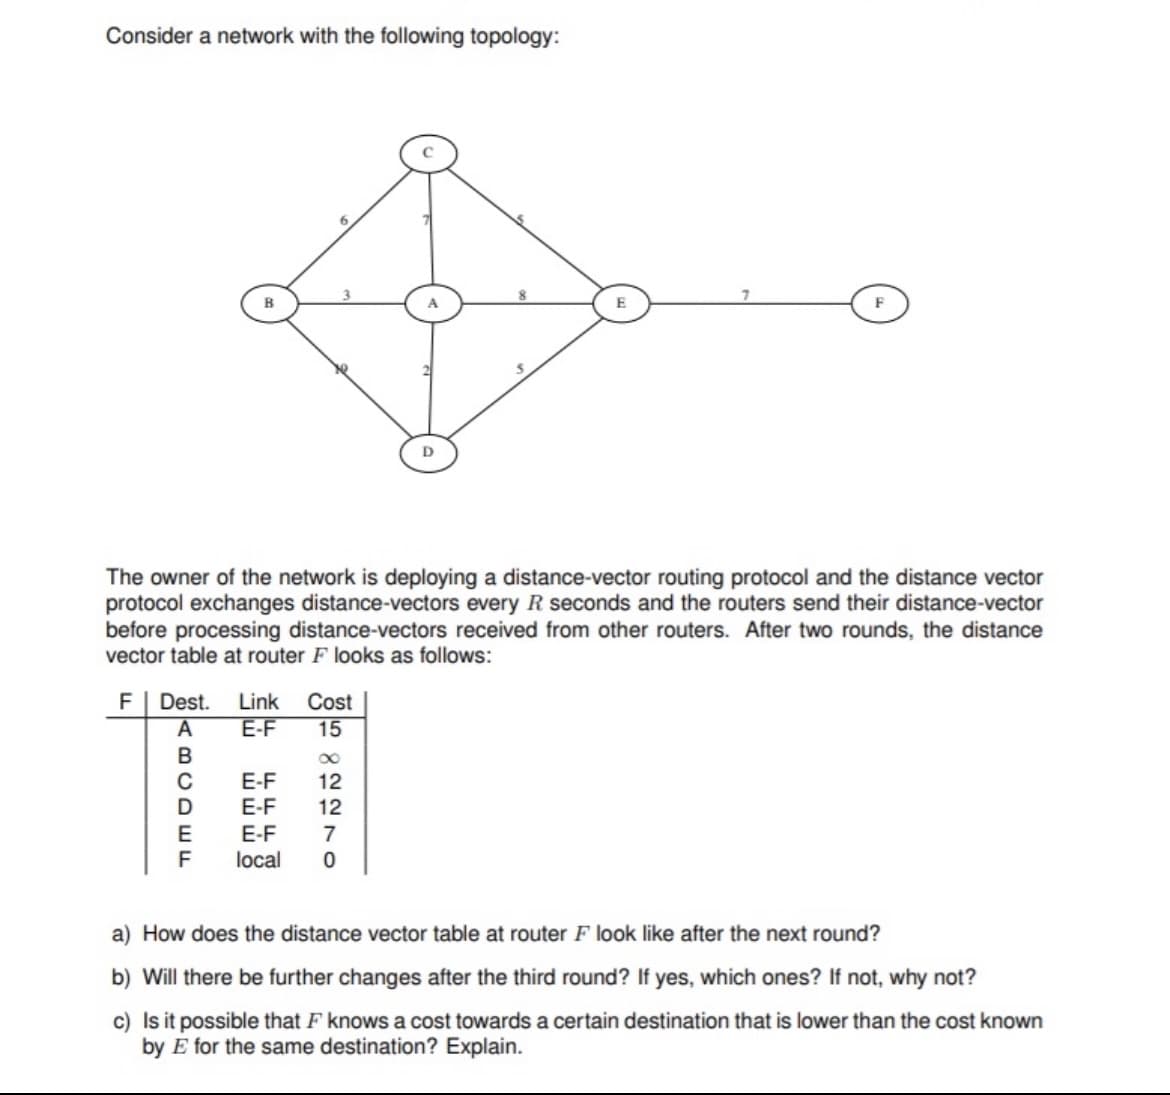 Consider a network with the following topology:
F
The owner of the network is deploying a distance-vector routing protocol and the distance vector
protocol exchanges distance-vectors every R seconds and the routers send their distance-vector
before processing distance-vectors received from other routers. After two rounds, the distance
vector table at router F looks as follows:
F| Dest.
Link
E-F
Cost
15
E-F
12
E-F
12
E-F
7
local
a) How does the distance vector table at router F look like after the next round?
b) Will there be further changes after the third round? If yes, which ones? If not, why not?
c) Is it possible that F knows a cost towards a certain destination that is lower than the cost known
by E for the same destination? Explain.
ABCDEE
